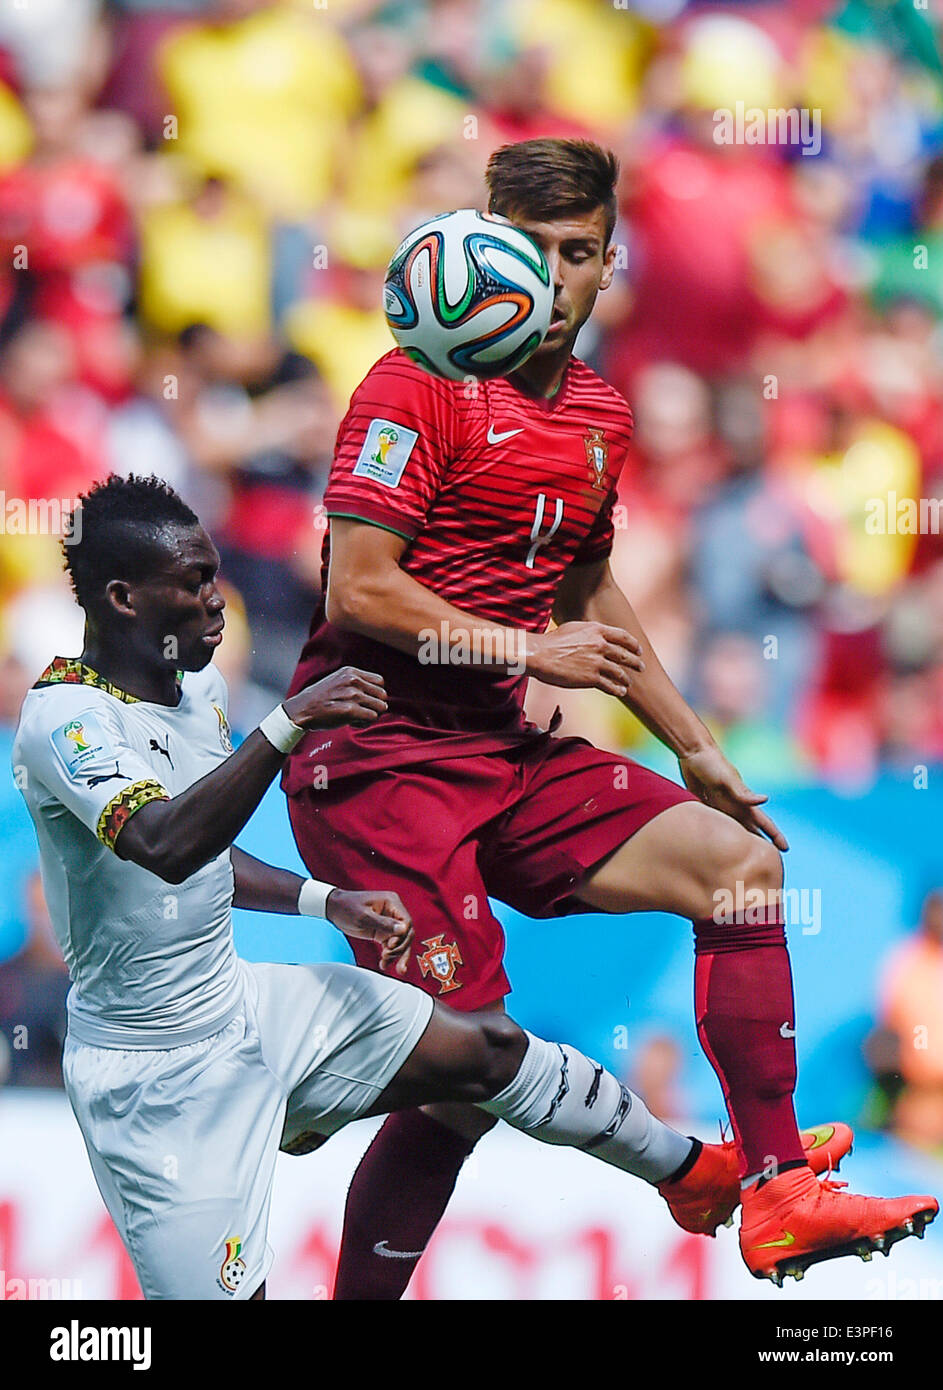 Brasilia, Brazil. 26th June, 2014. Portugal's Miguel Veloso (L) competes during a Group G match between Portugal and Ghana of 2014 FIFA World Cup at the Estadio Nacional Stadium in Brasilia, Brazil, June 26, 2014. Portugal won 2-1 over Ghana on Thursday. © Qi Heng/Xinhua/Alamy Live News Stock Photo